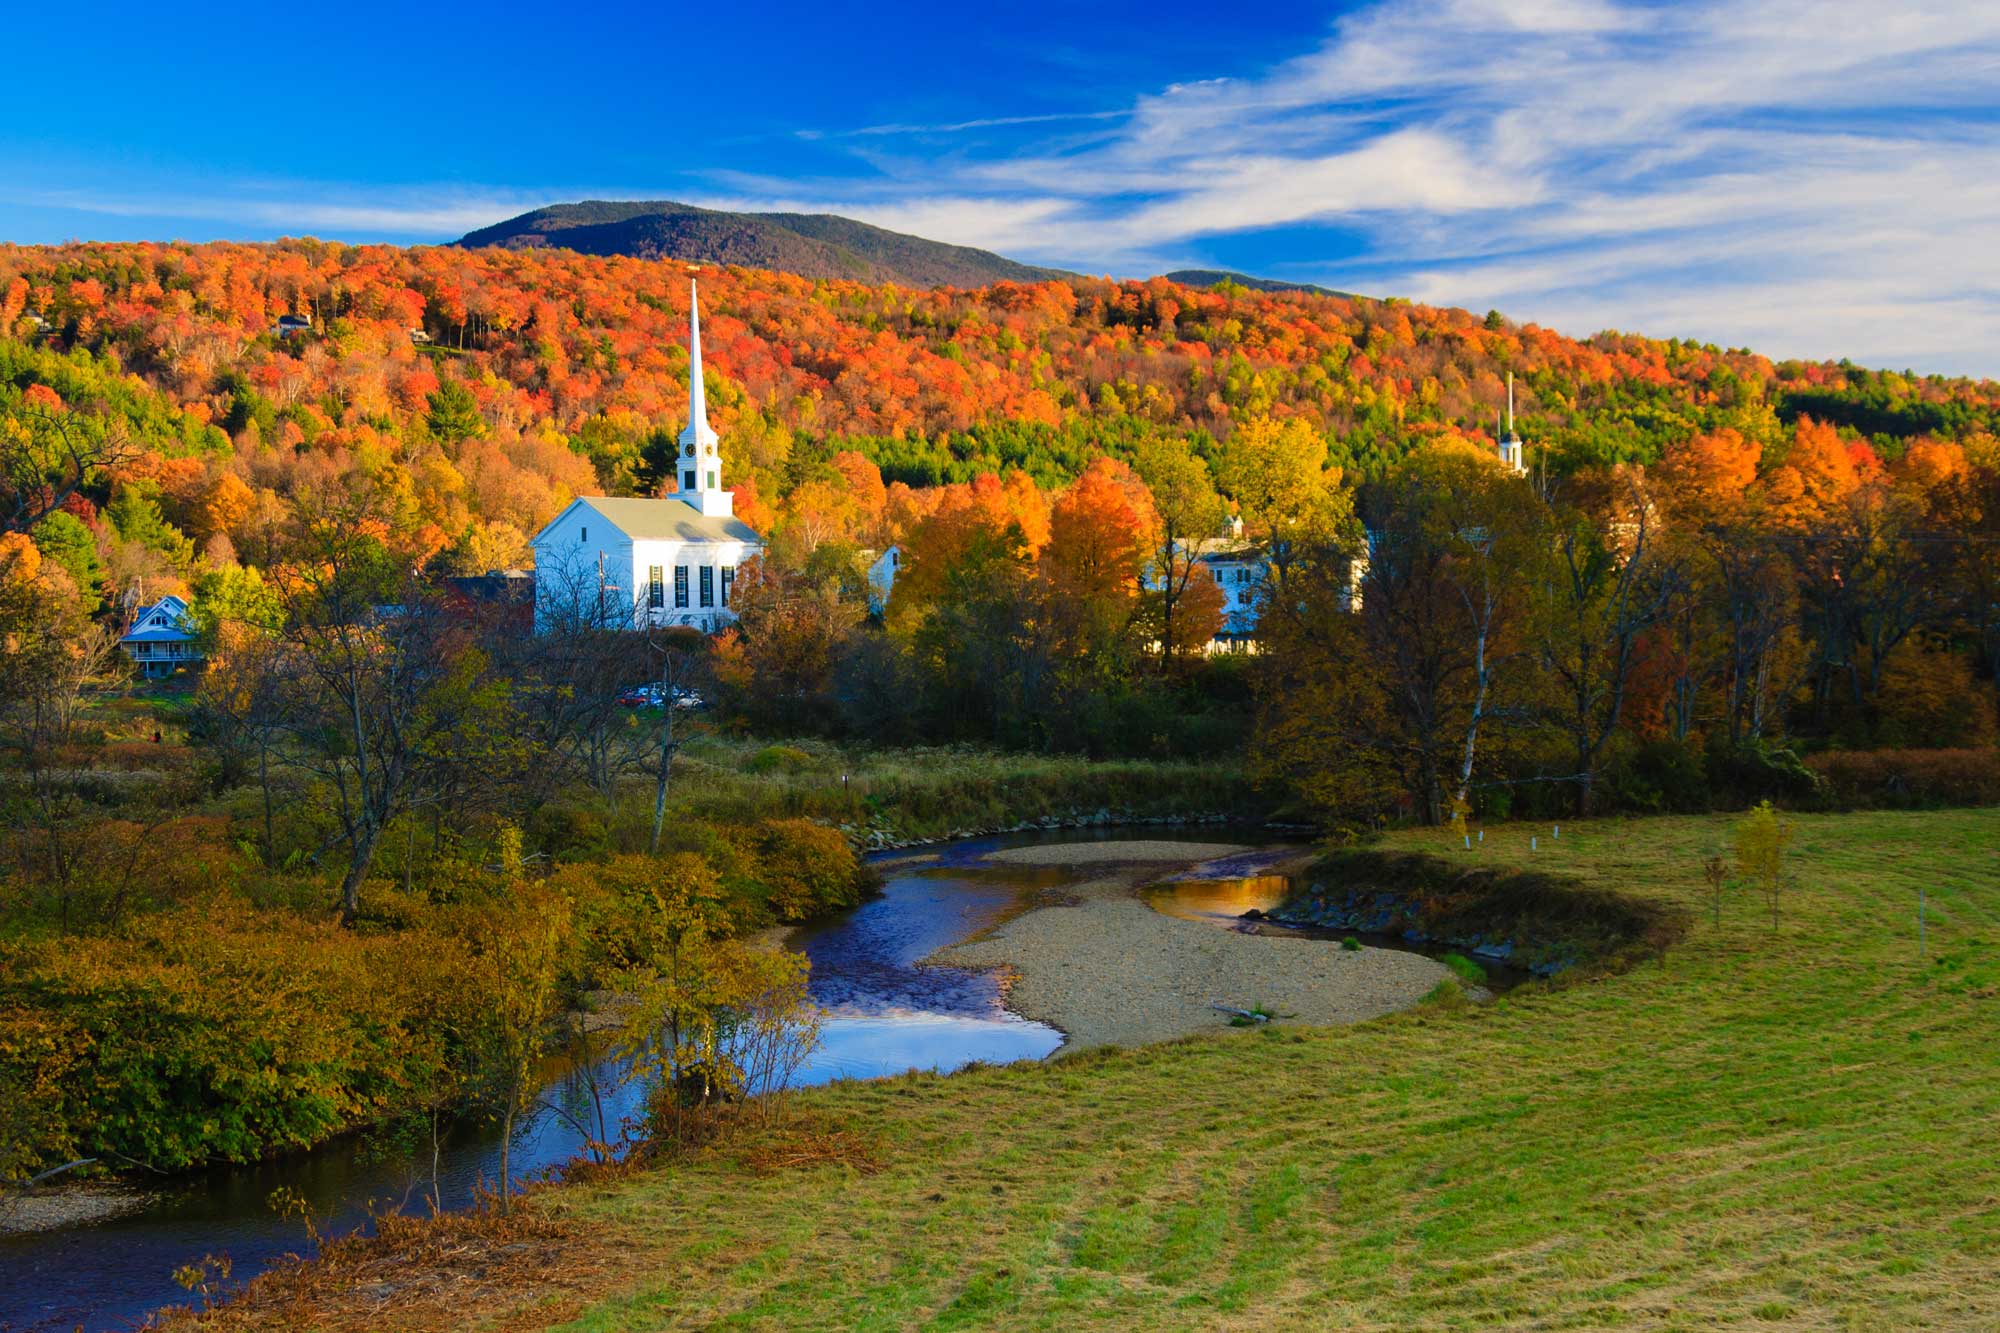 6 Perfect Fall Honeymoon Destinations | Where to get Married in Fall | Autumn Wedding Honeymoon Location Ideas | Vermont